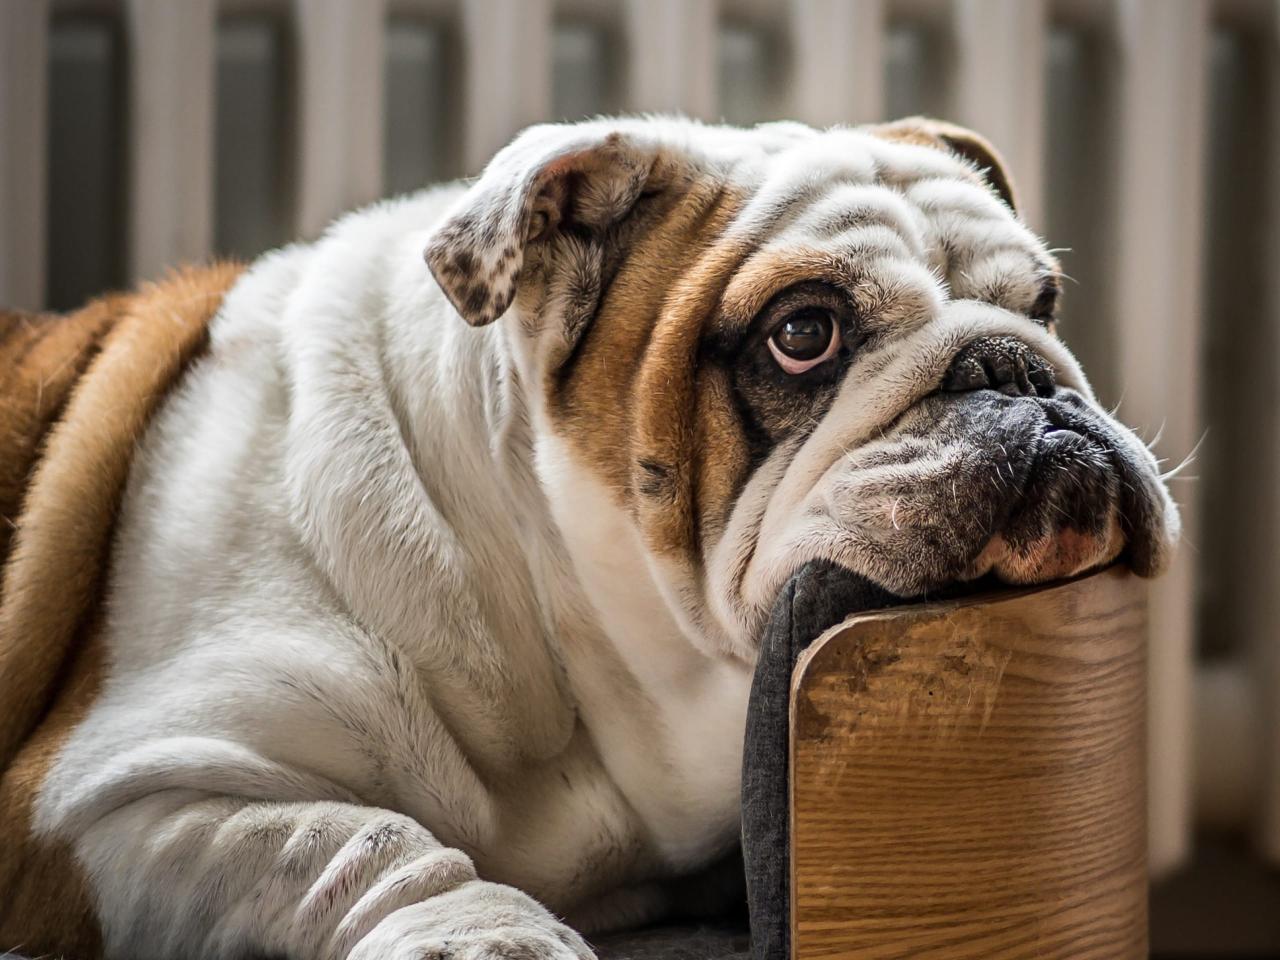 Prednisone For Dogs: Usage And Side Effects